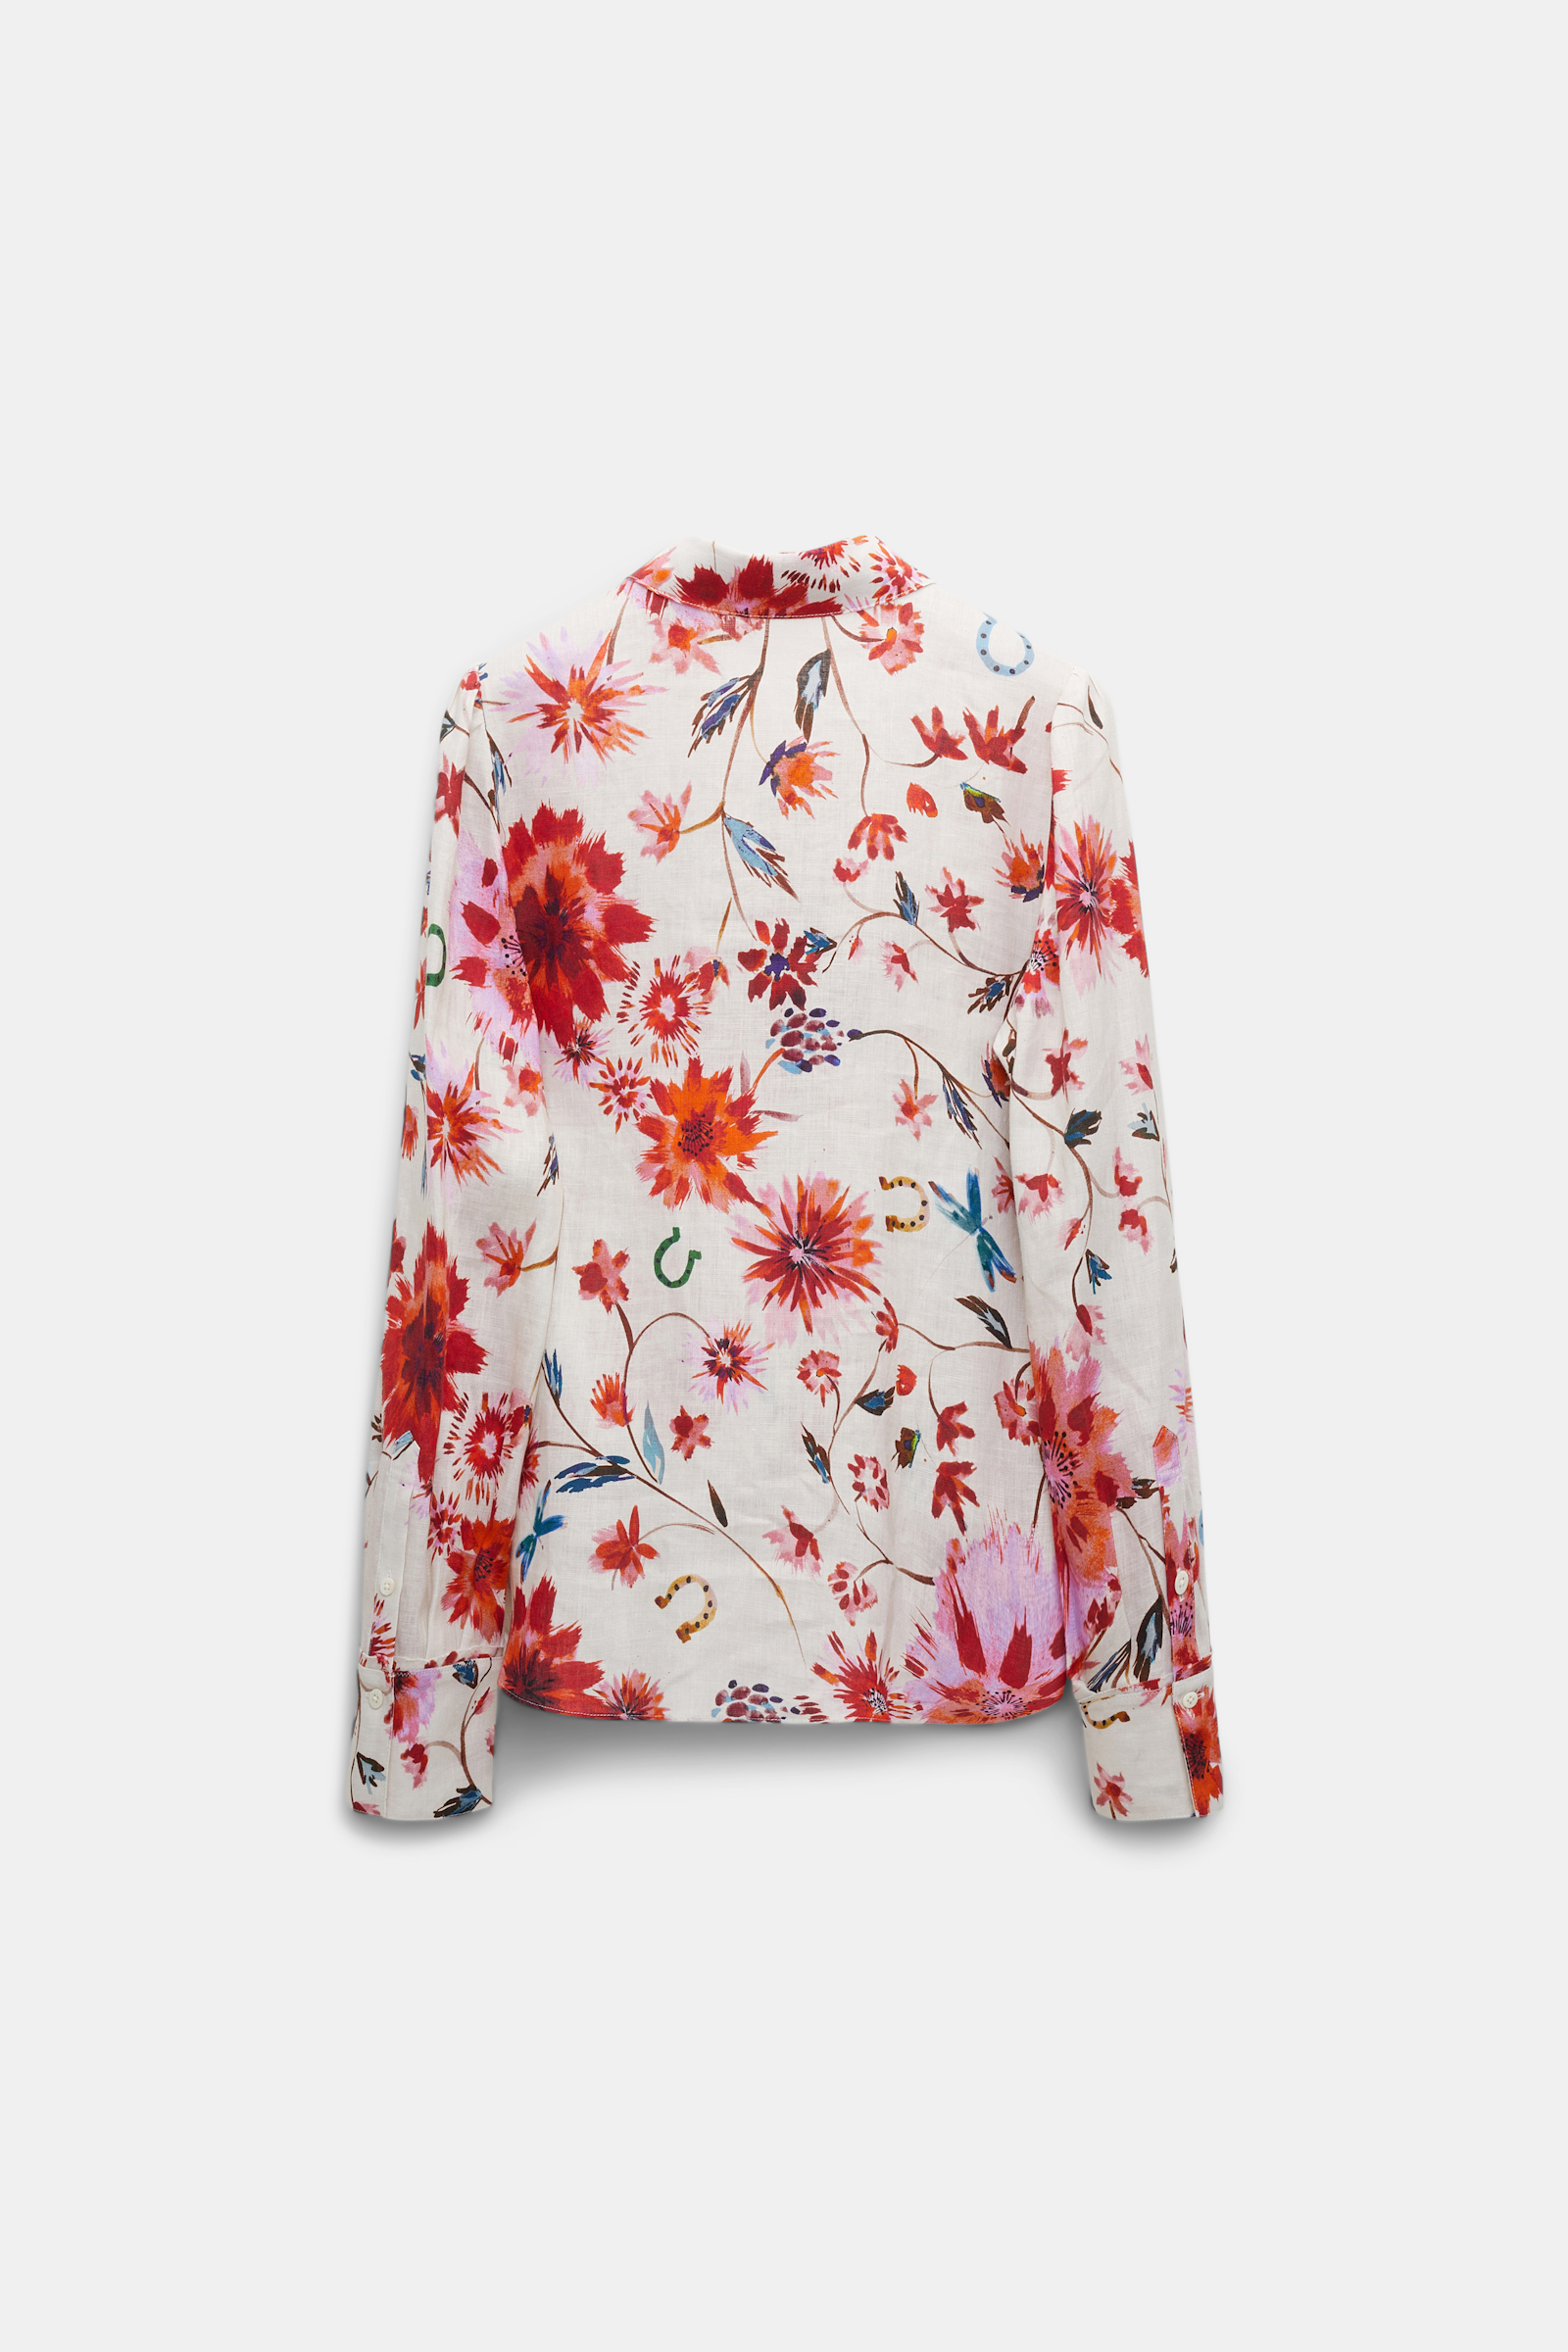 Dorothee Schumacher Printed linen blouse with tie and Western-inspired styling floral mix